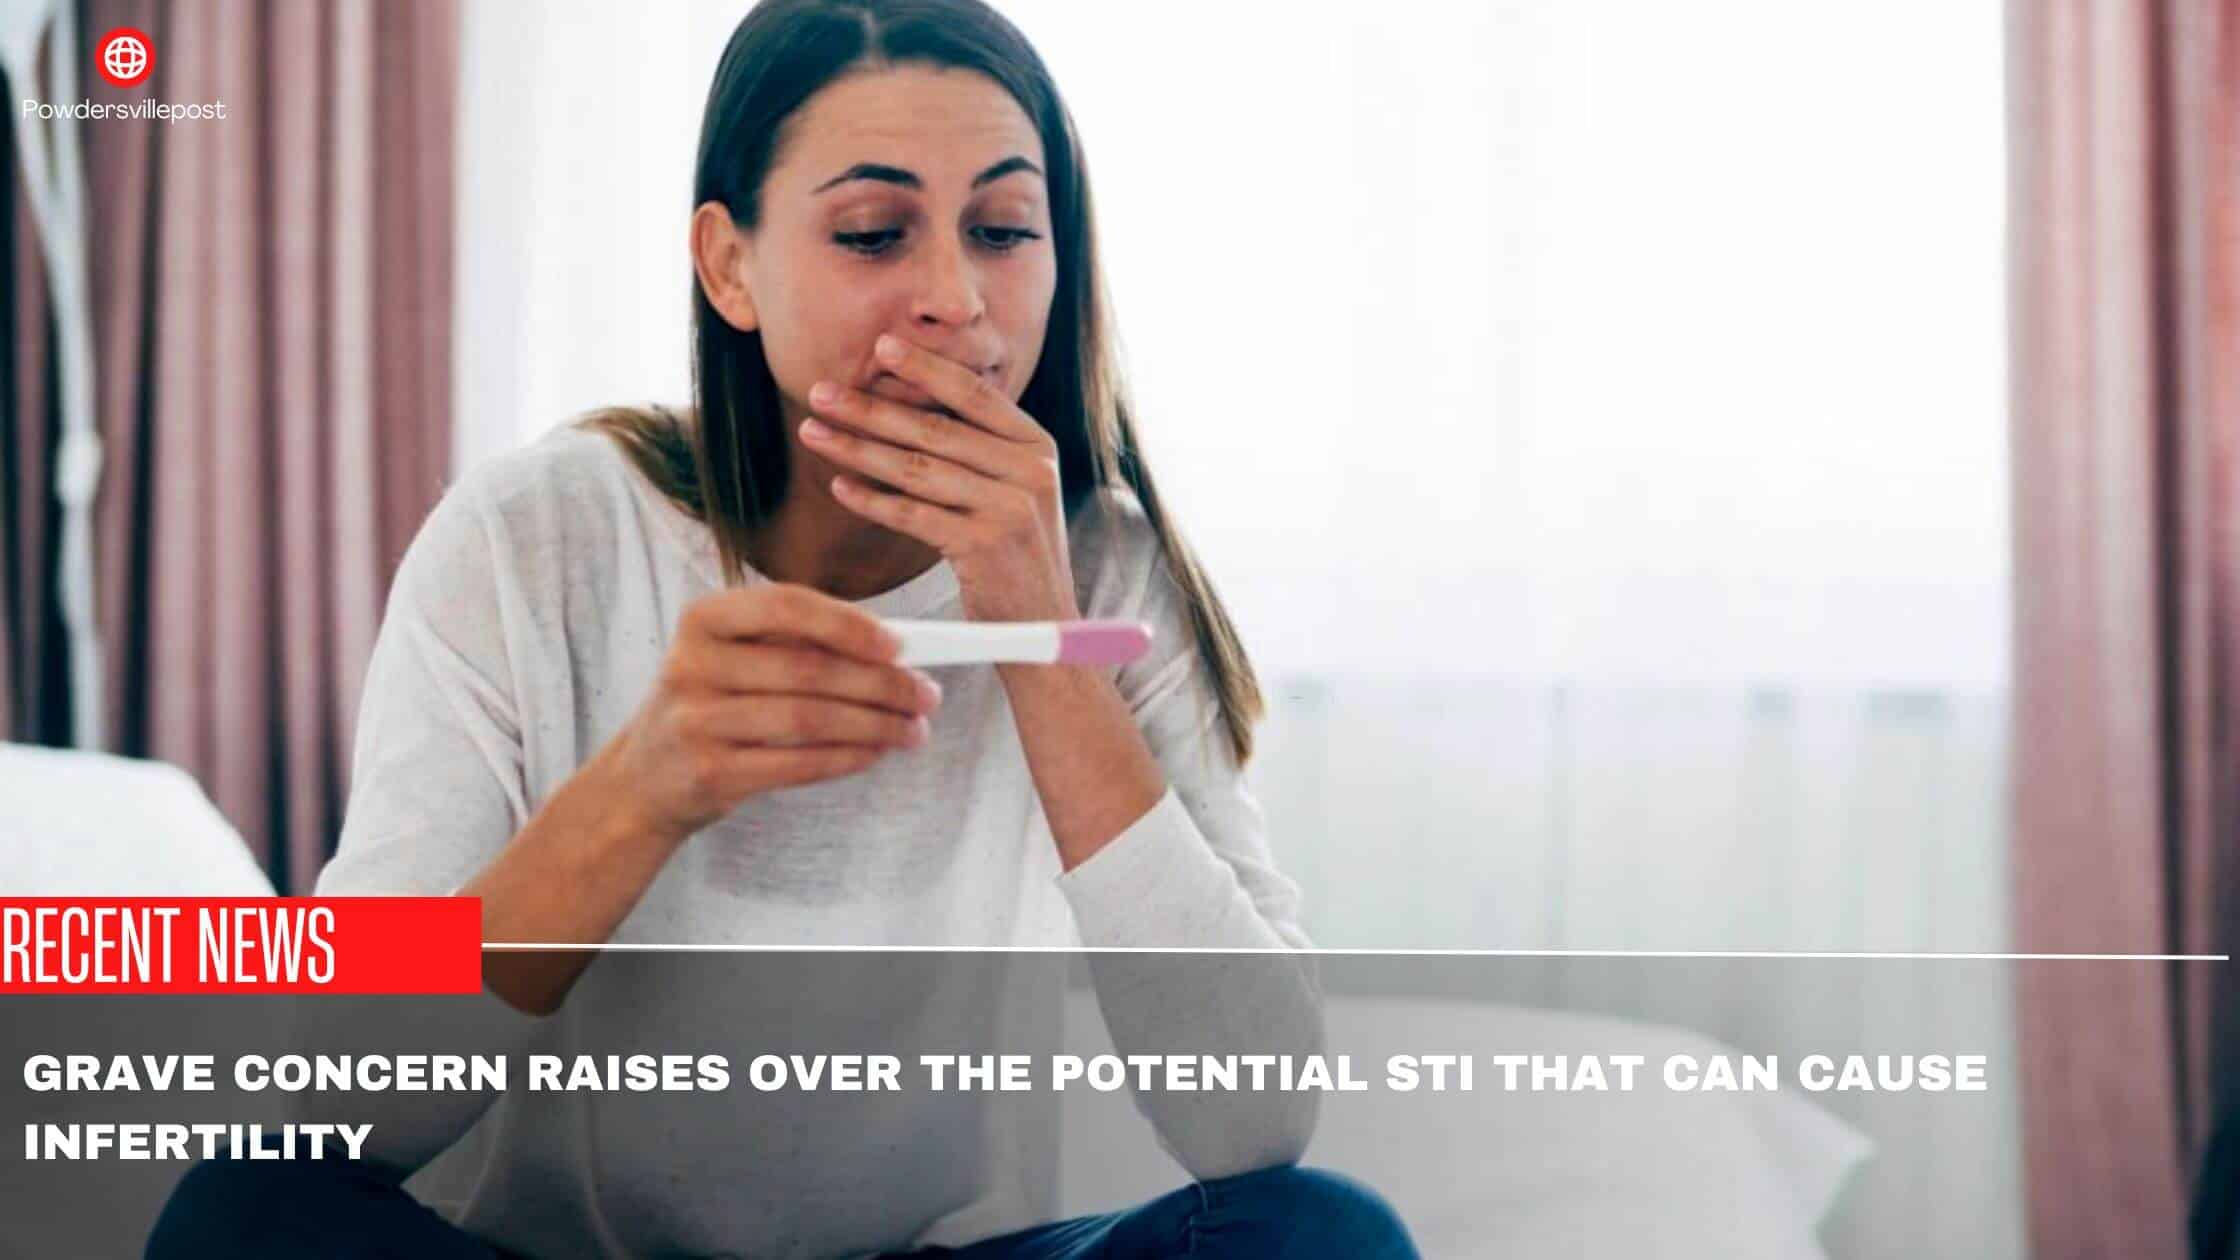 Grave Concern Raises Over The Potential STI That Can Cause Infertility